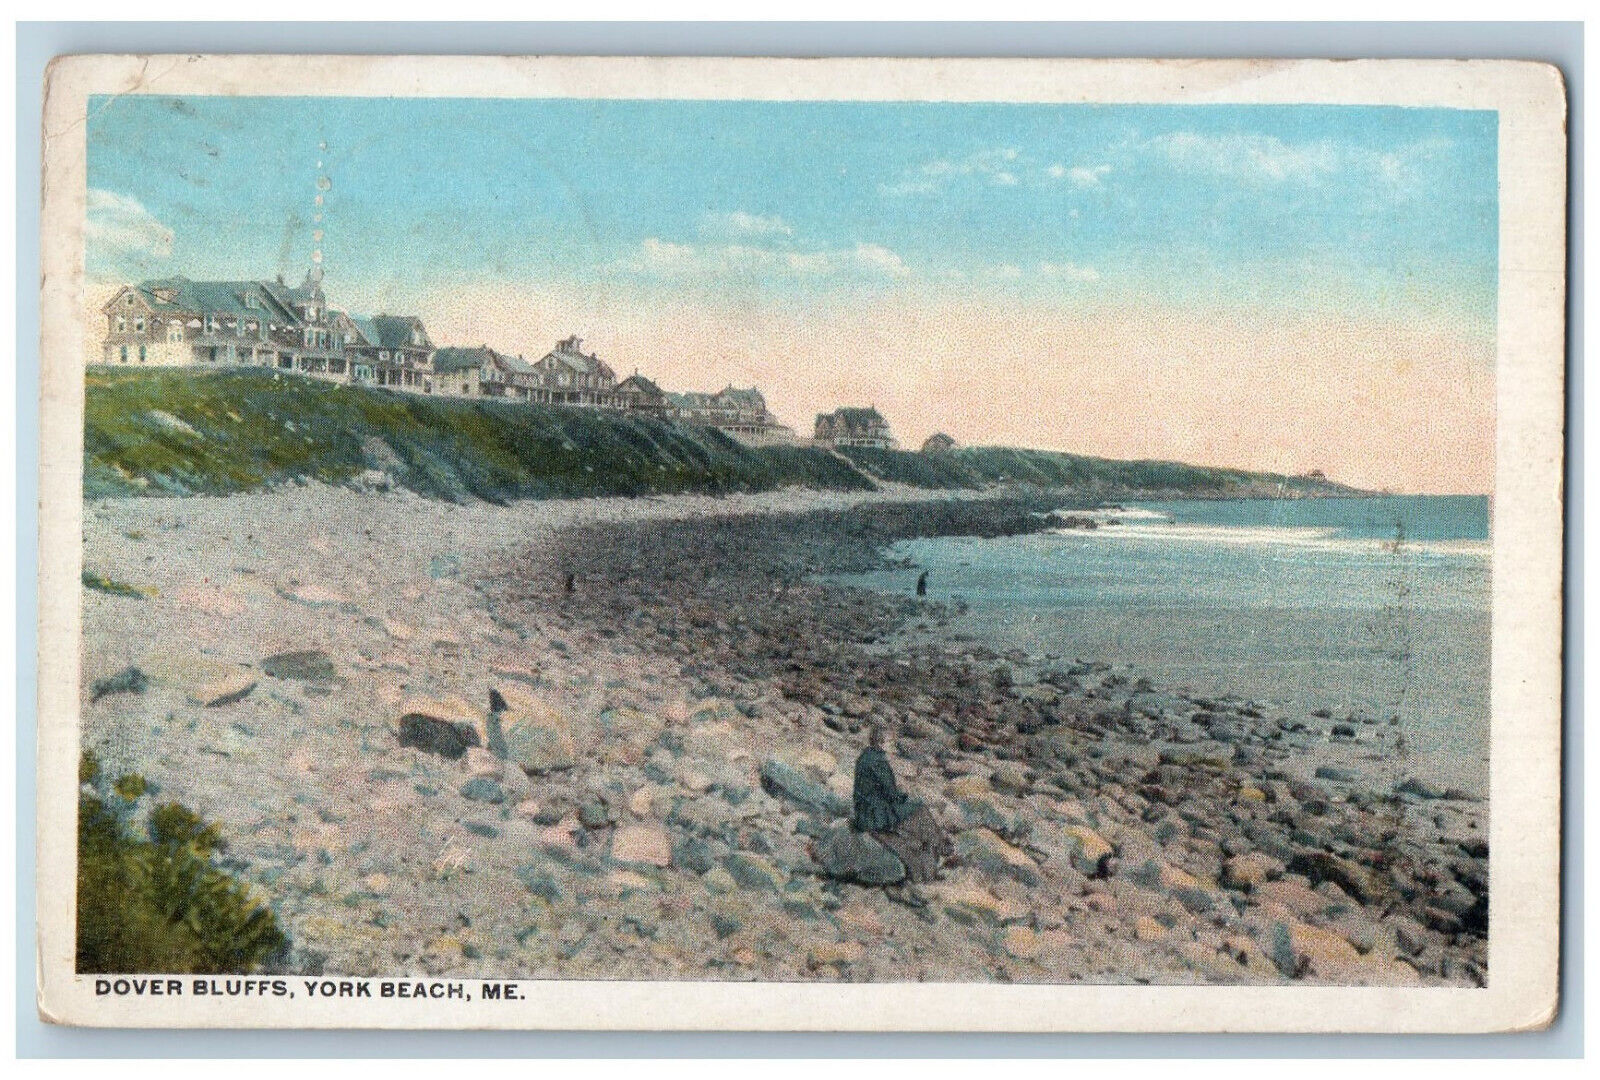 1923 Shore Scene Dover Bluffs York Beach Maine ME Vintage Posted Postcard